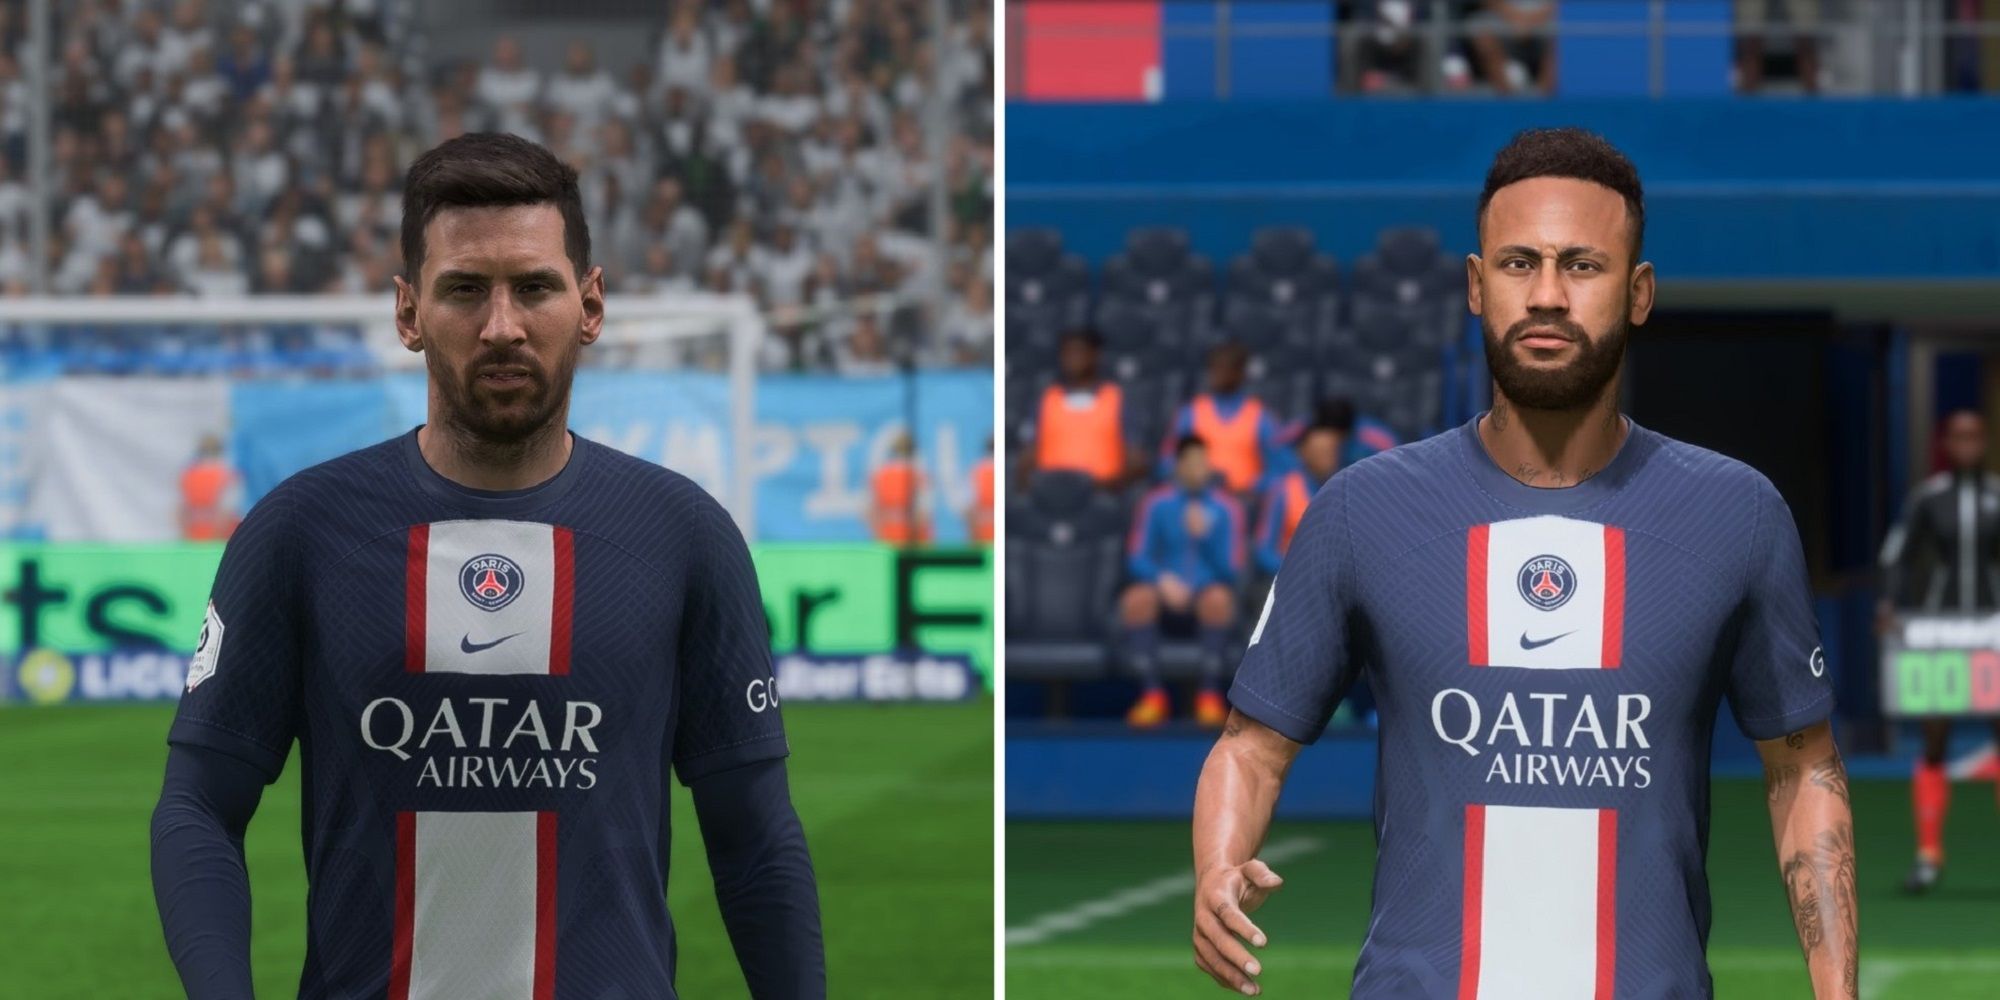 An image of Lionel Messi and Neymar in FIFA 23